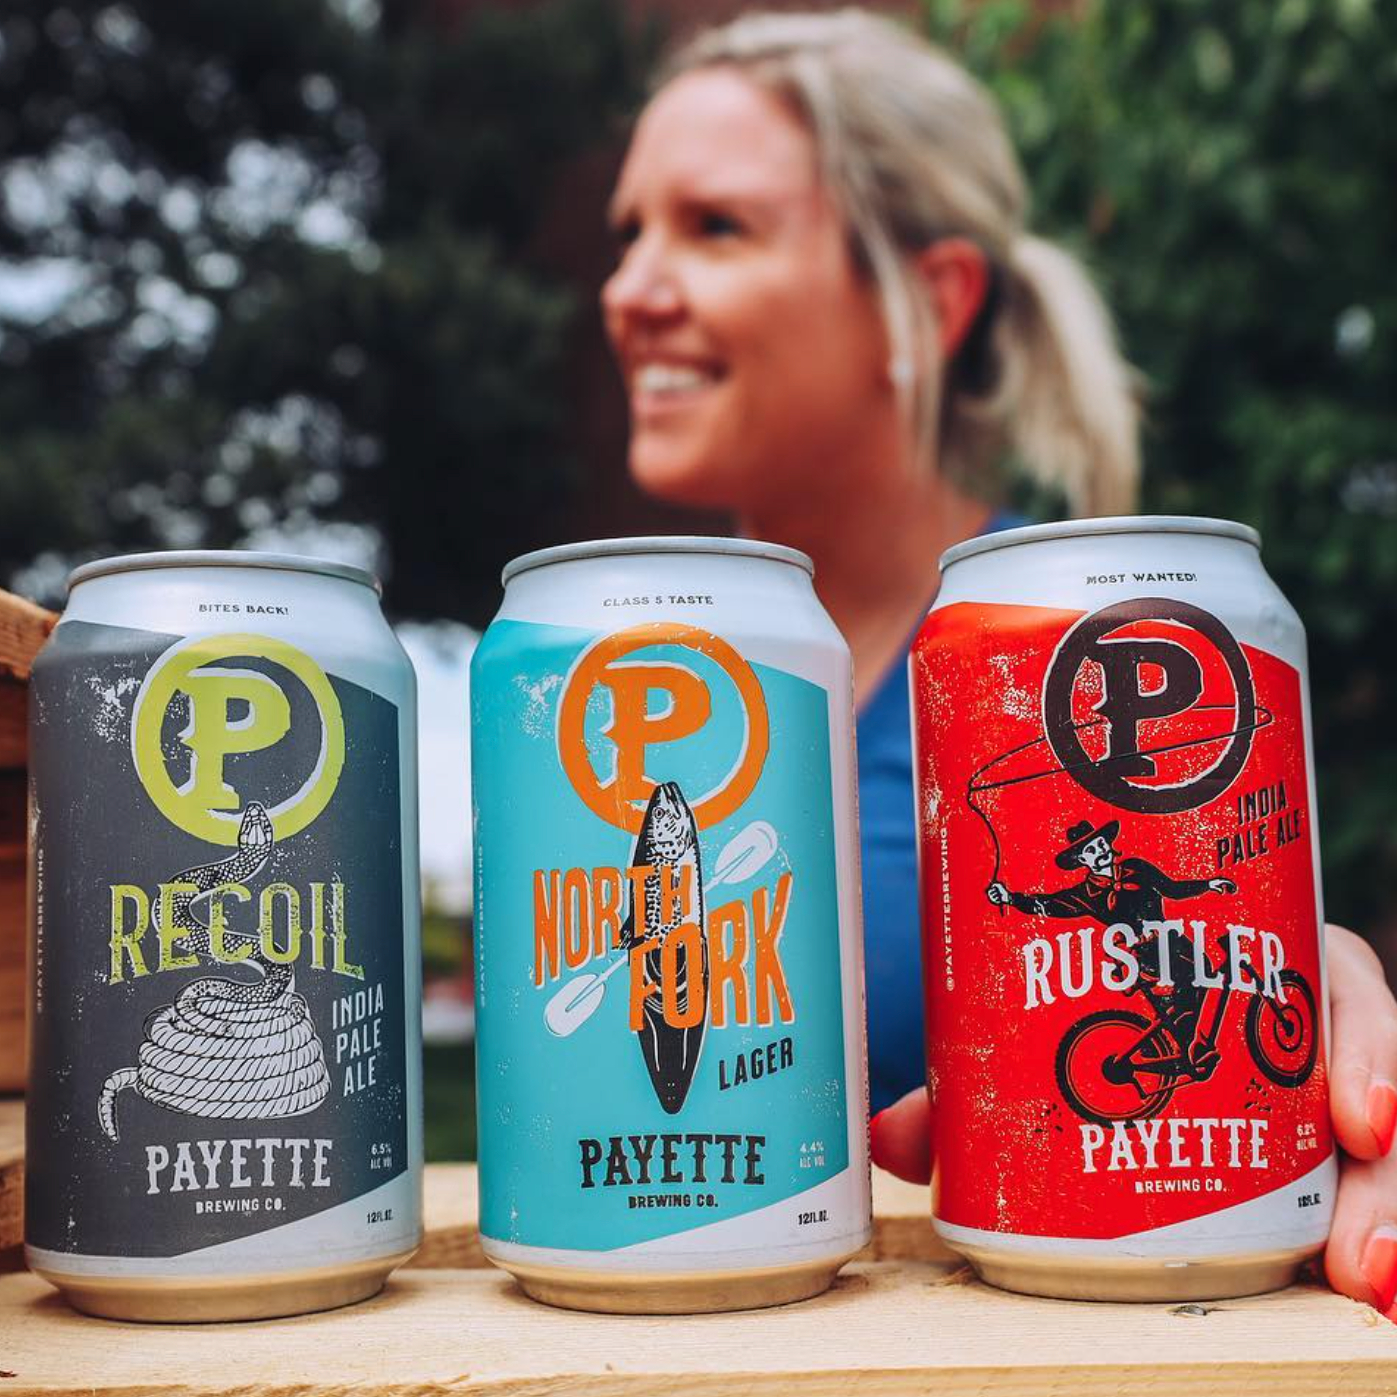 Payette Brewing Company